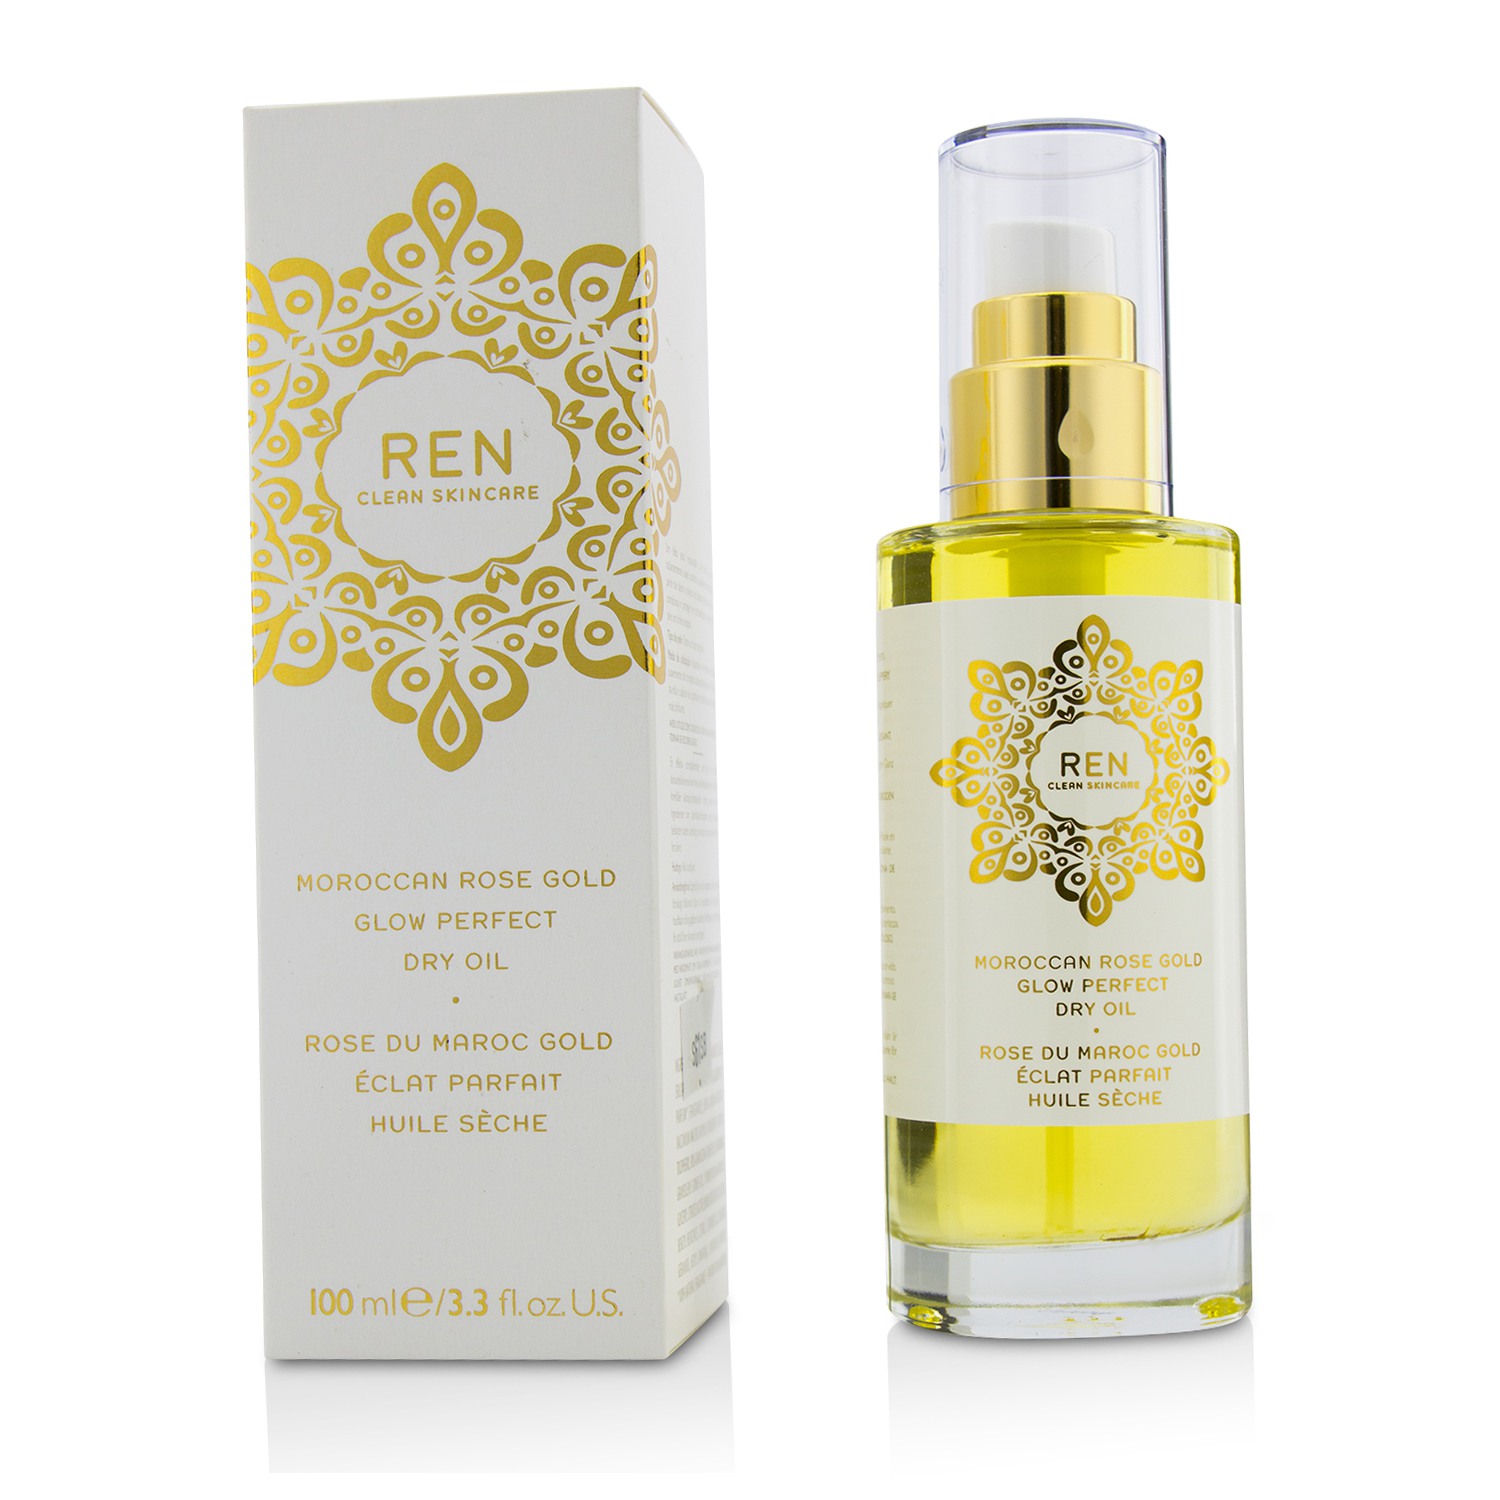 Moroccan Rose Gold Glow Perfect Dry Oil Ren Image